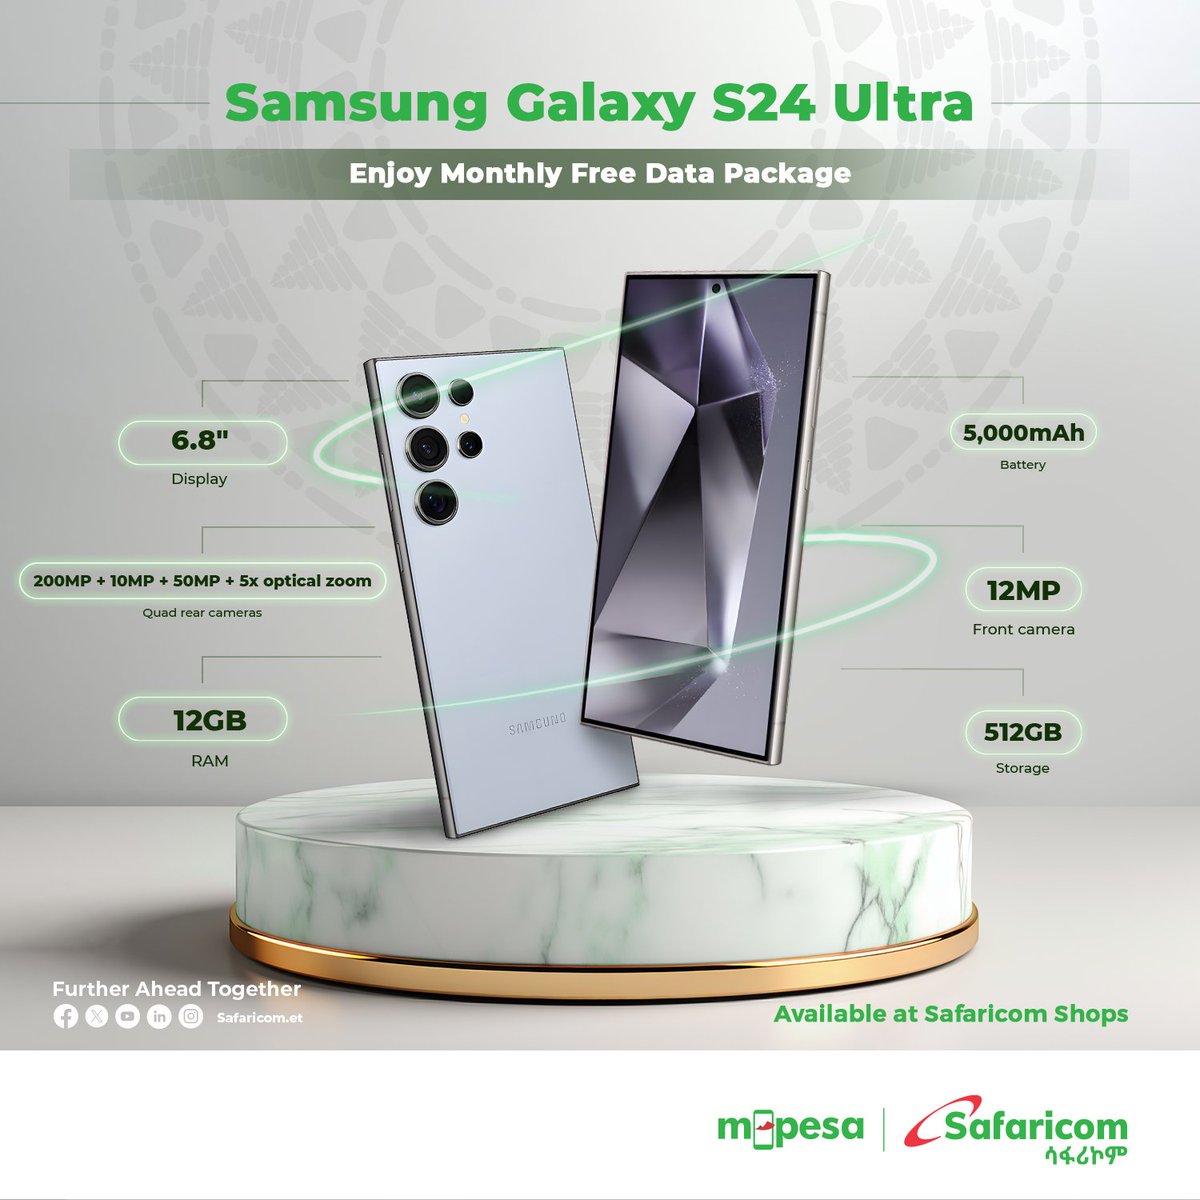 Experience mobile AI at its finest & stay connected like never before. Samsung Galaxy S24 is now available at Safaricom Ethiopia Shops! #MPESASafaricom #SafaricomEthiopia #Furtheraheadtogether